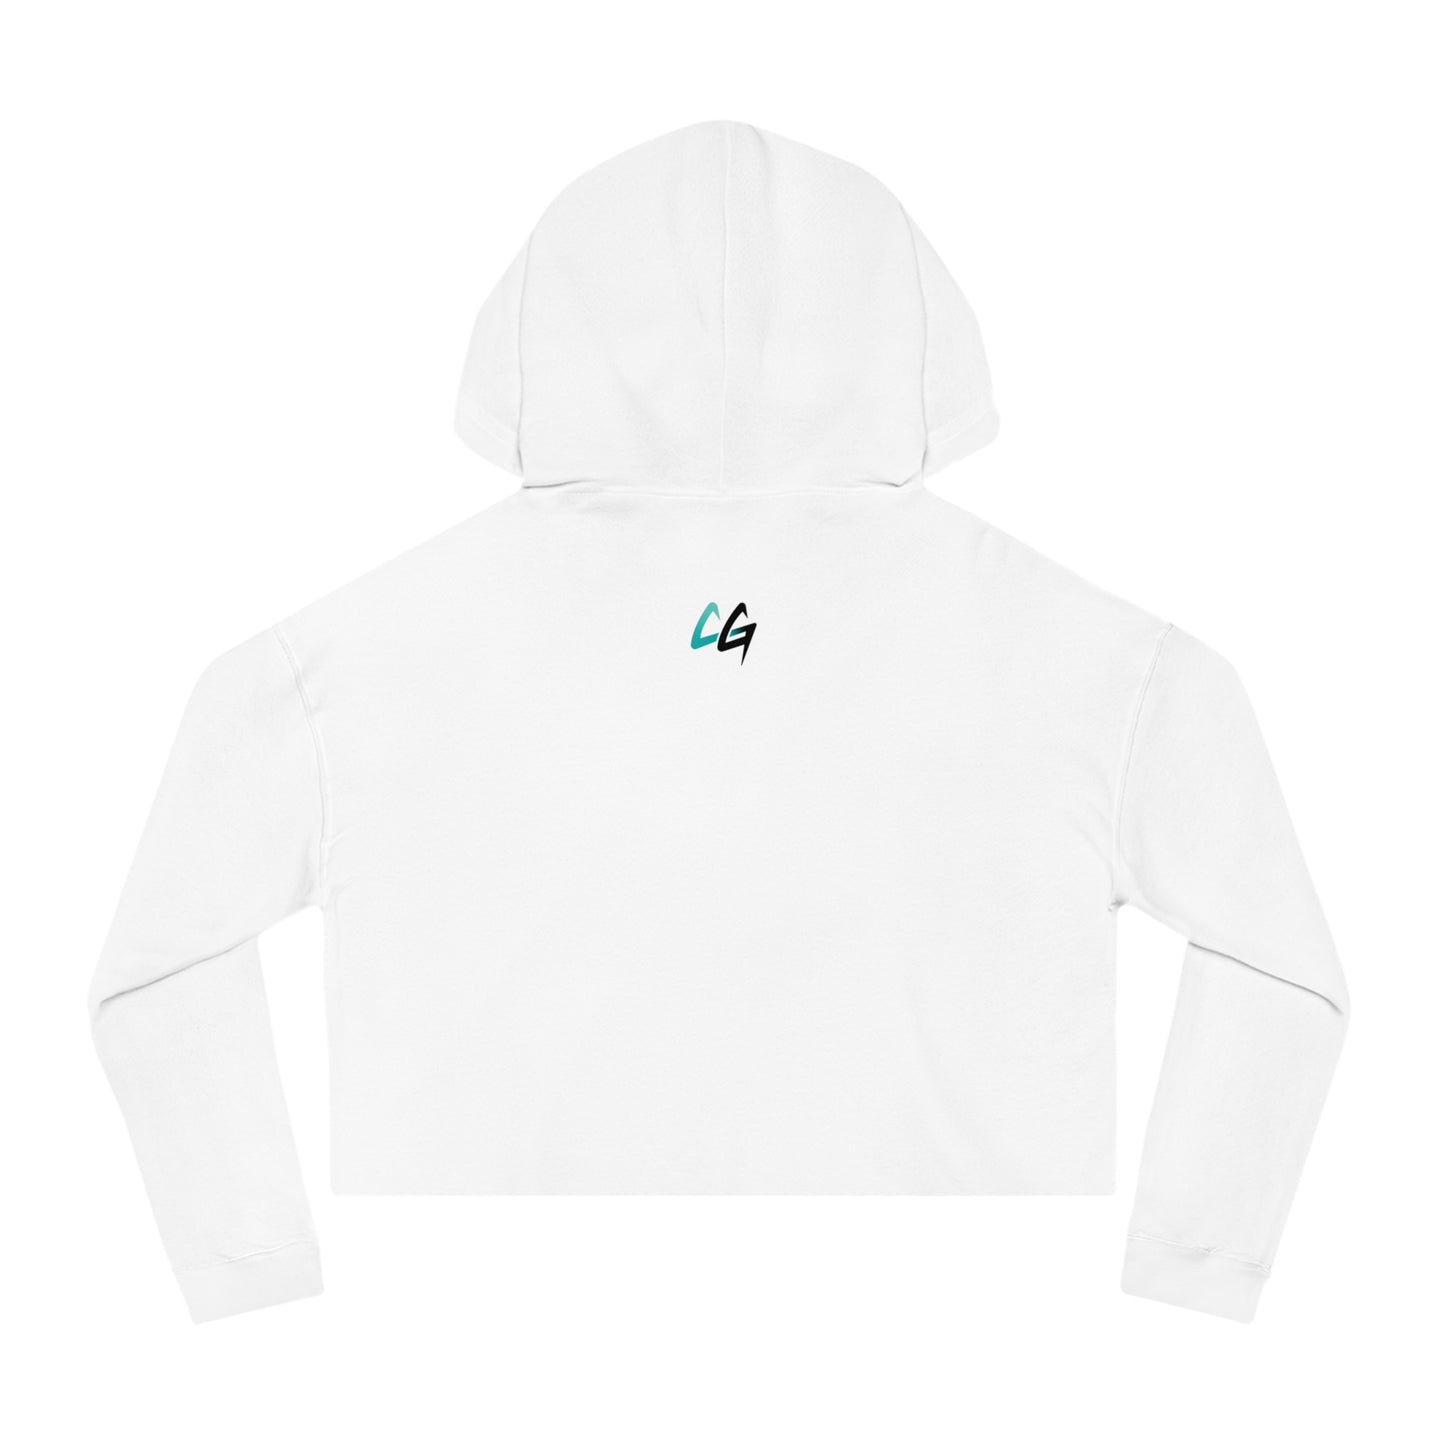 CLVTCH Cropped Hooded Sweatshirt